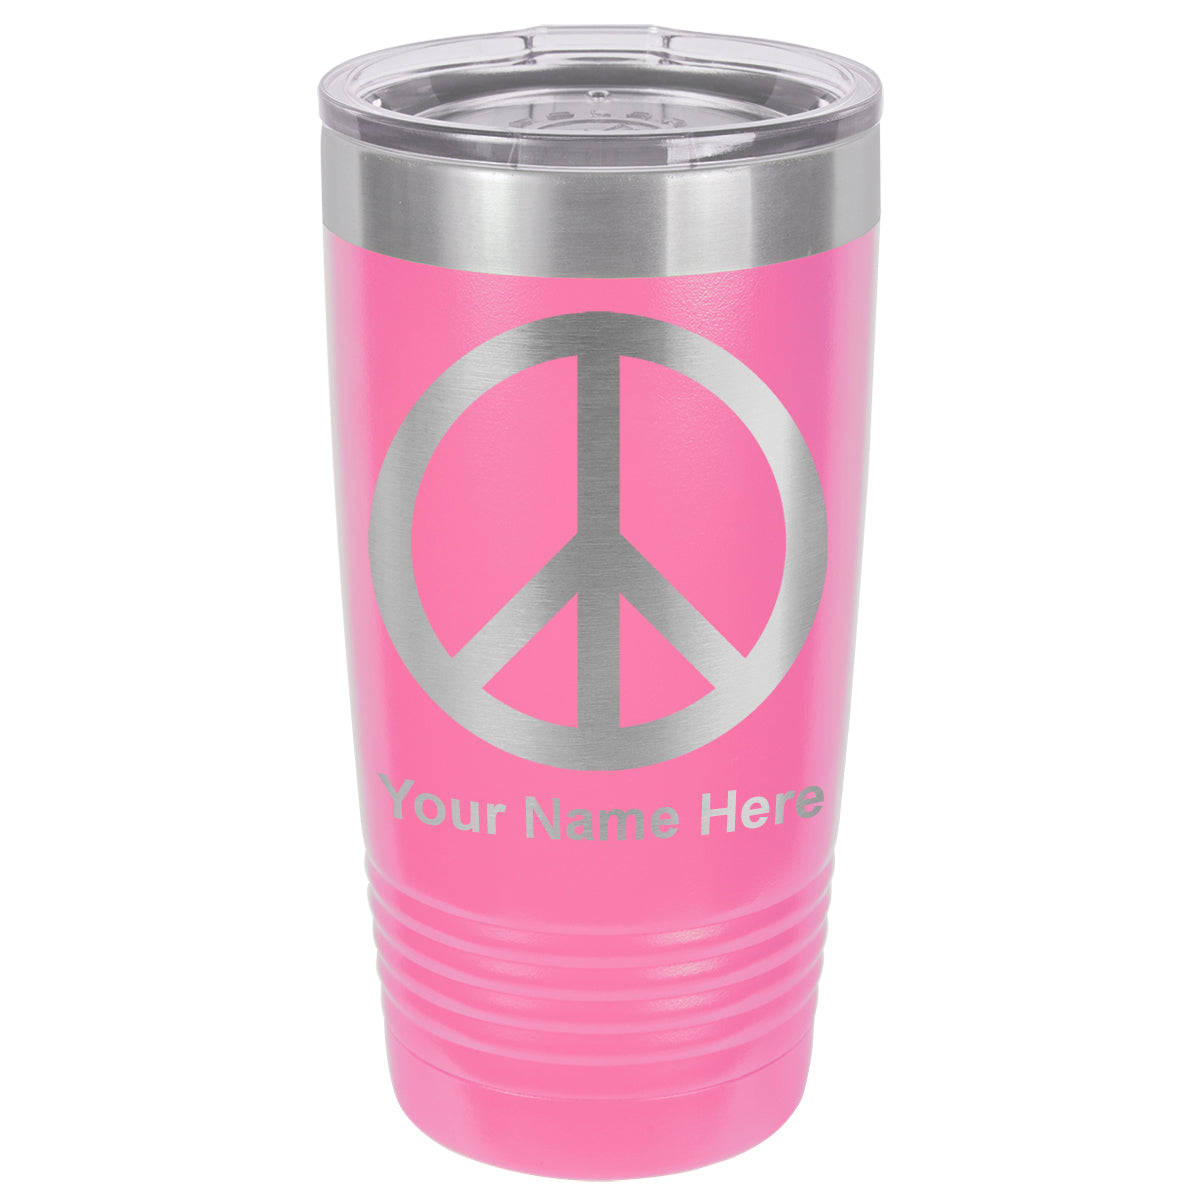 20oz Vacuum Insulated Tumbler Mug, Peace Sign, Personalized Engraving Included